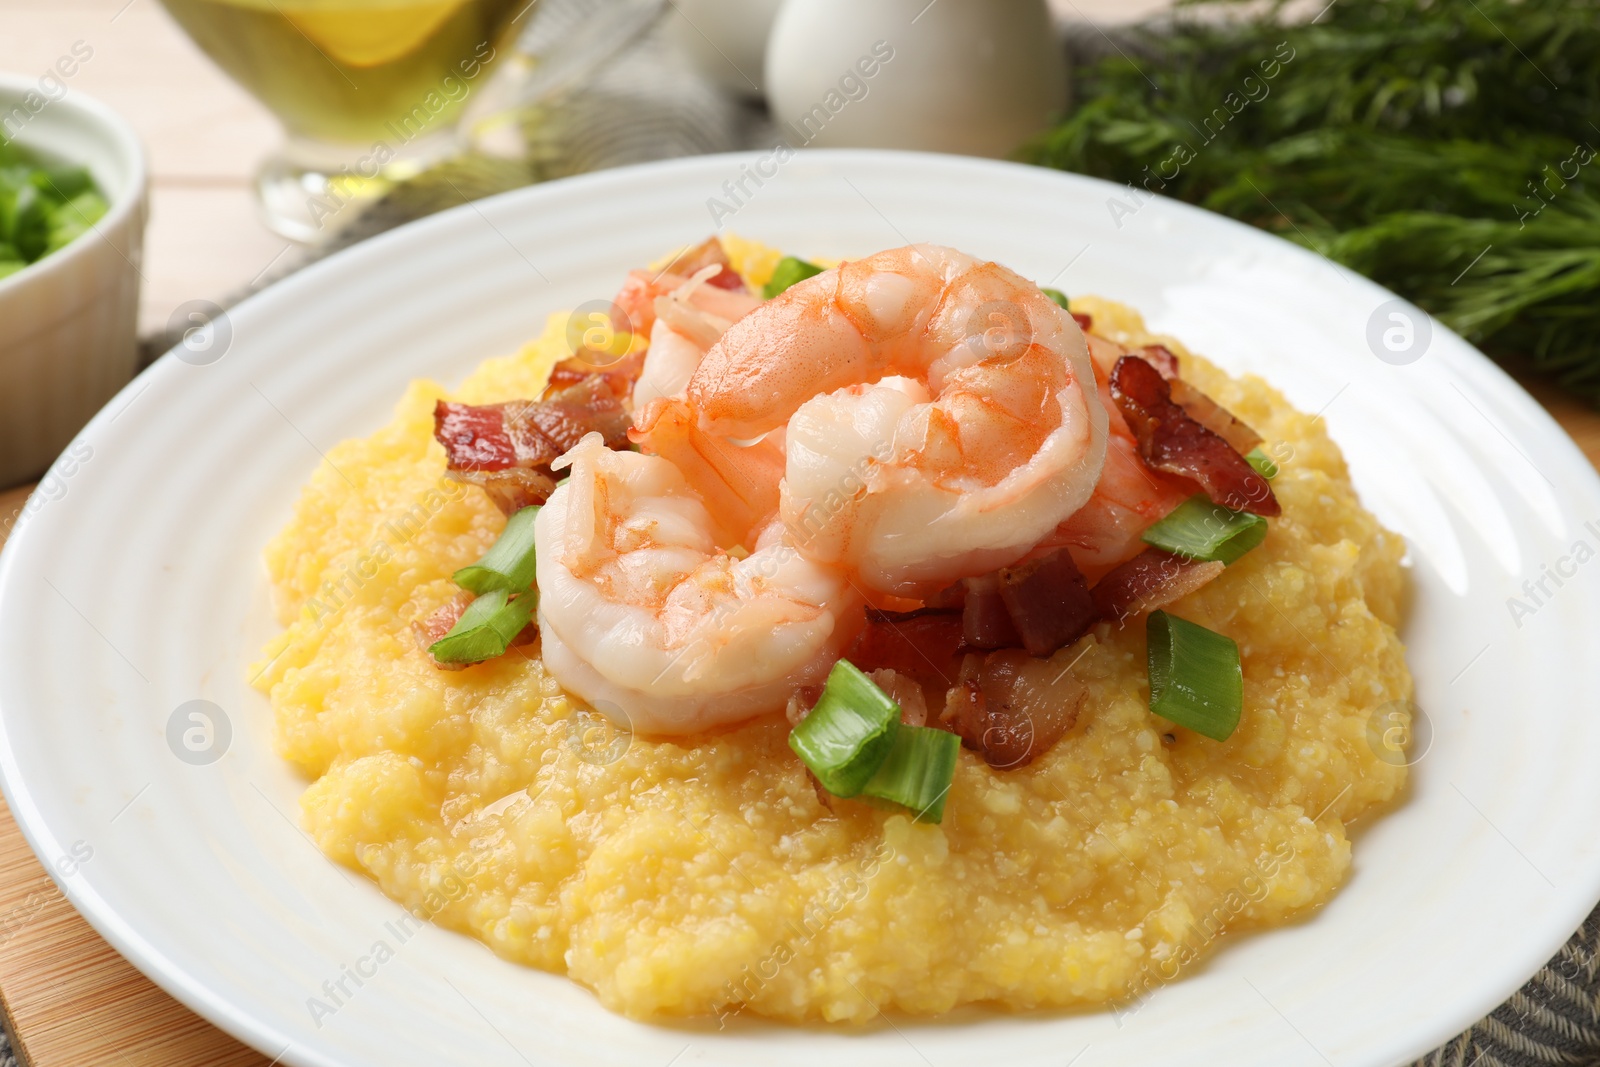 Photo of Plate with fresh tasty shrimps, bacon, grits and green onion on table, closeup